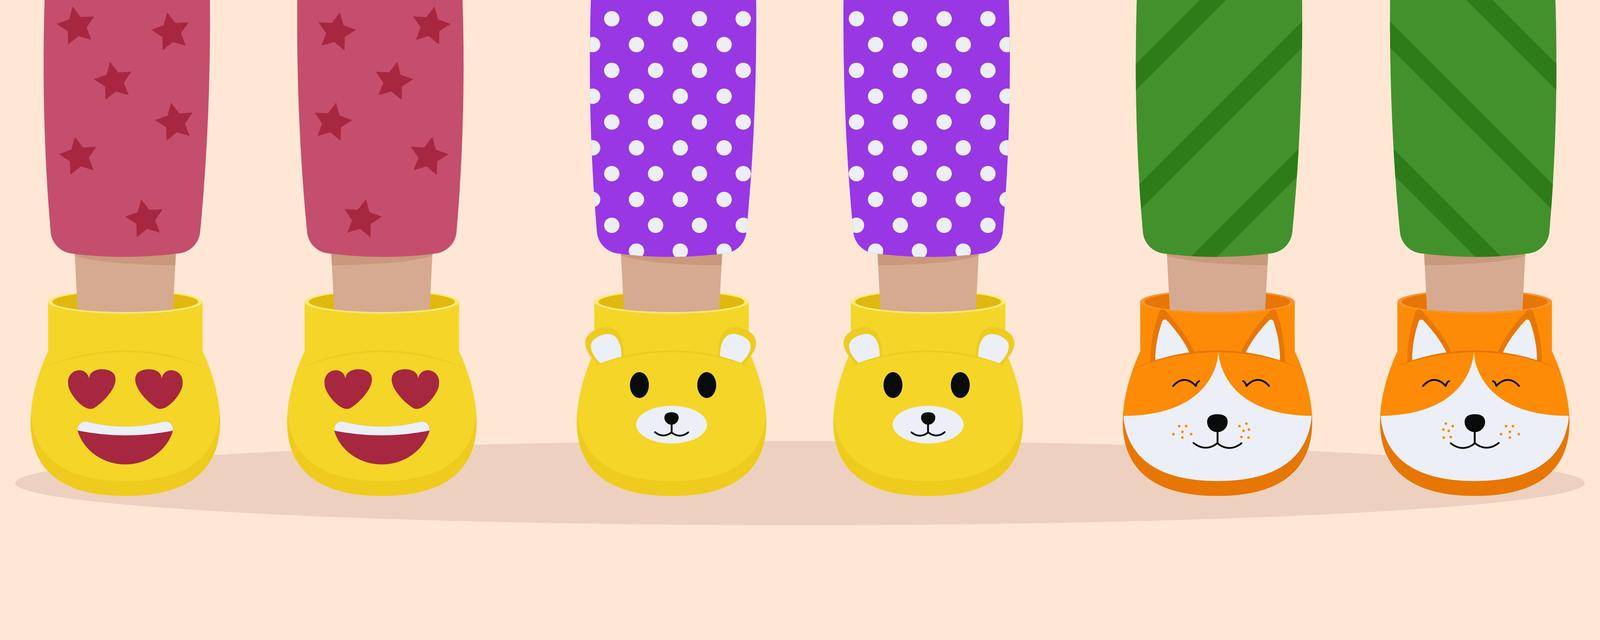 Set of children pajama slippers. Children feet in funny slippers. Pajama party